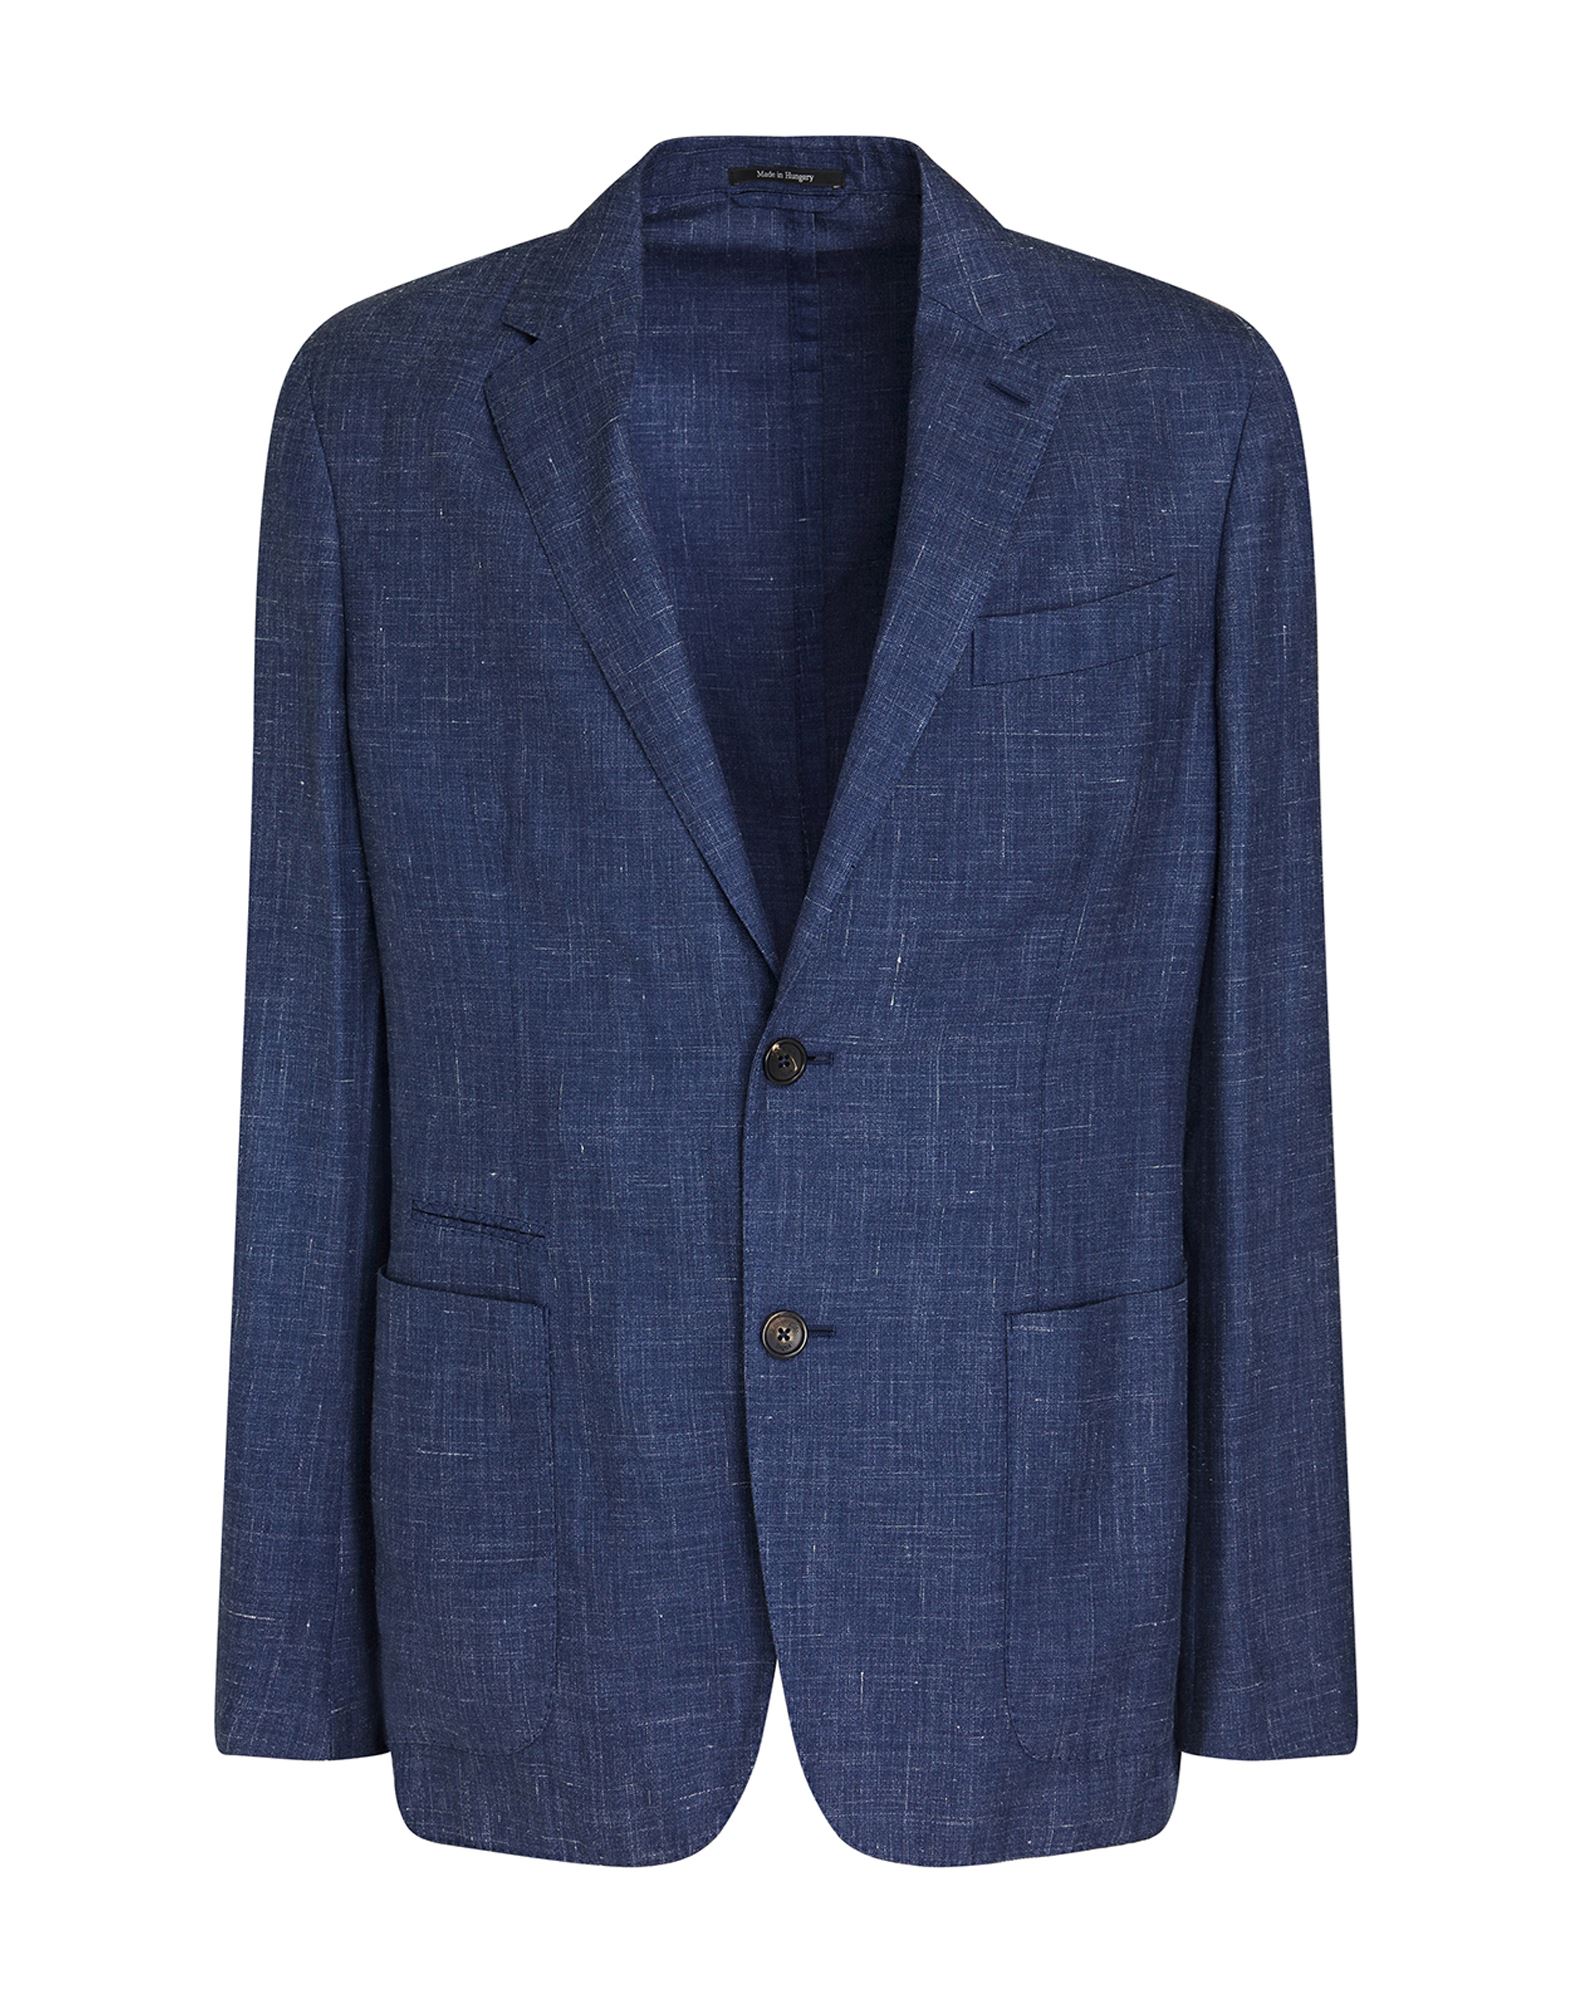 Zegna Suit Jackets In Navy Blue